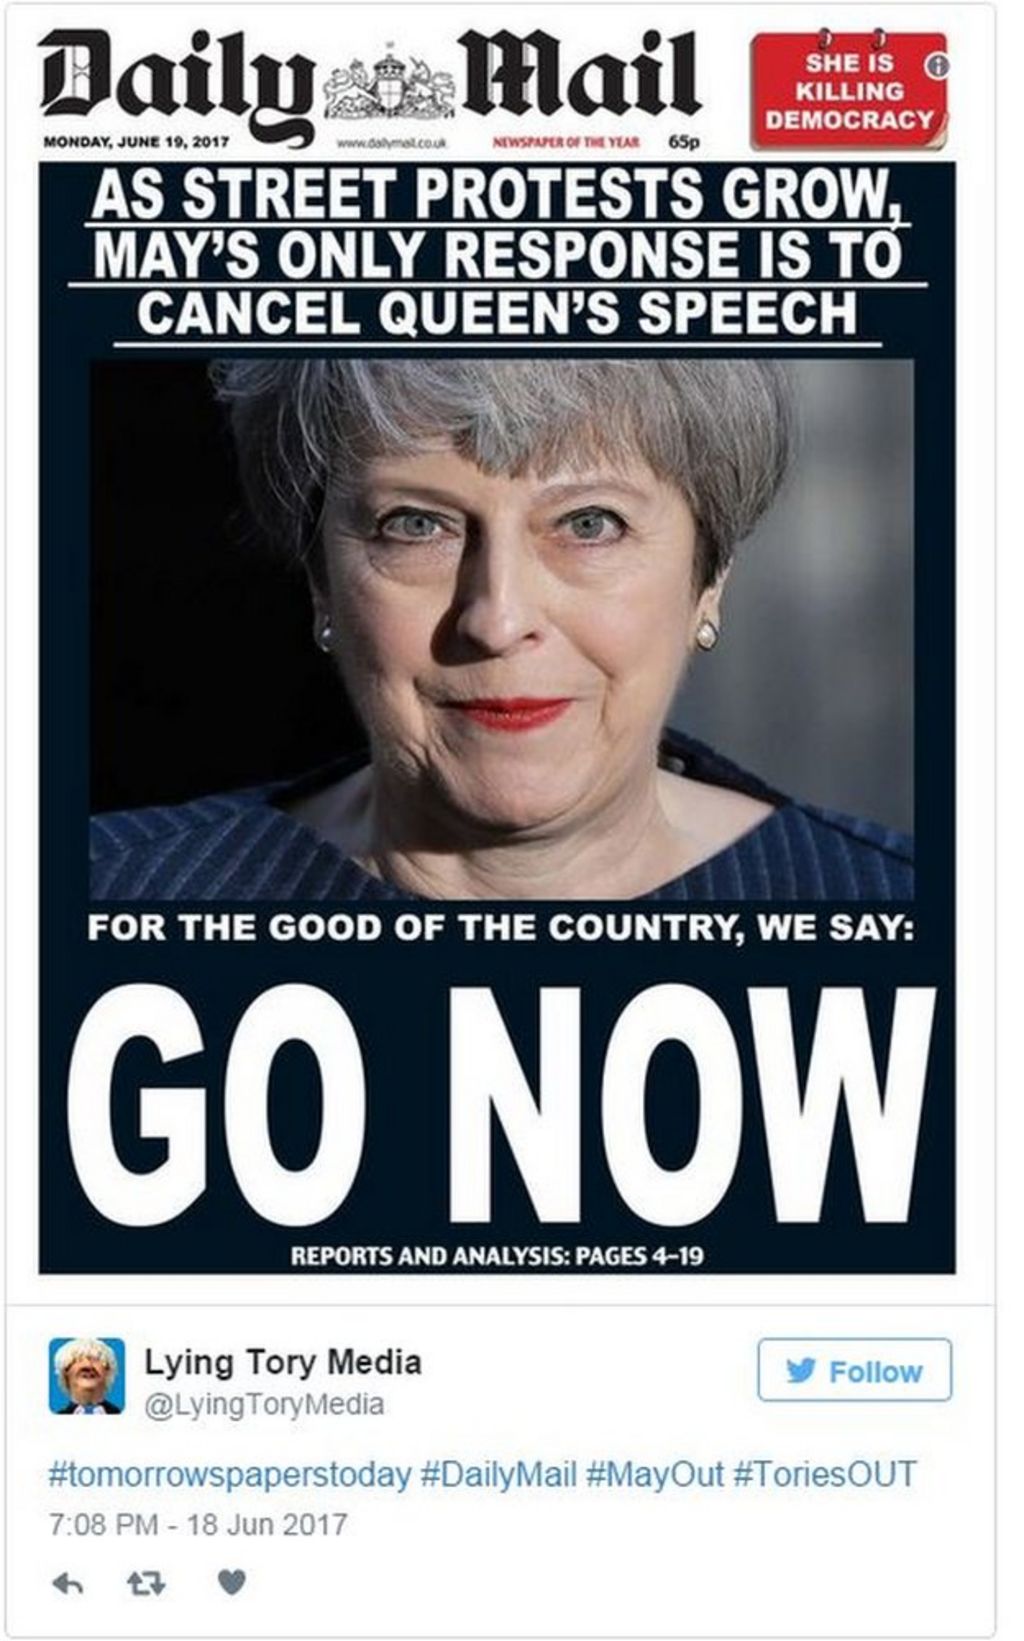 No, the Daily Mail did not tell May to 'GO NOW' - BBC News